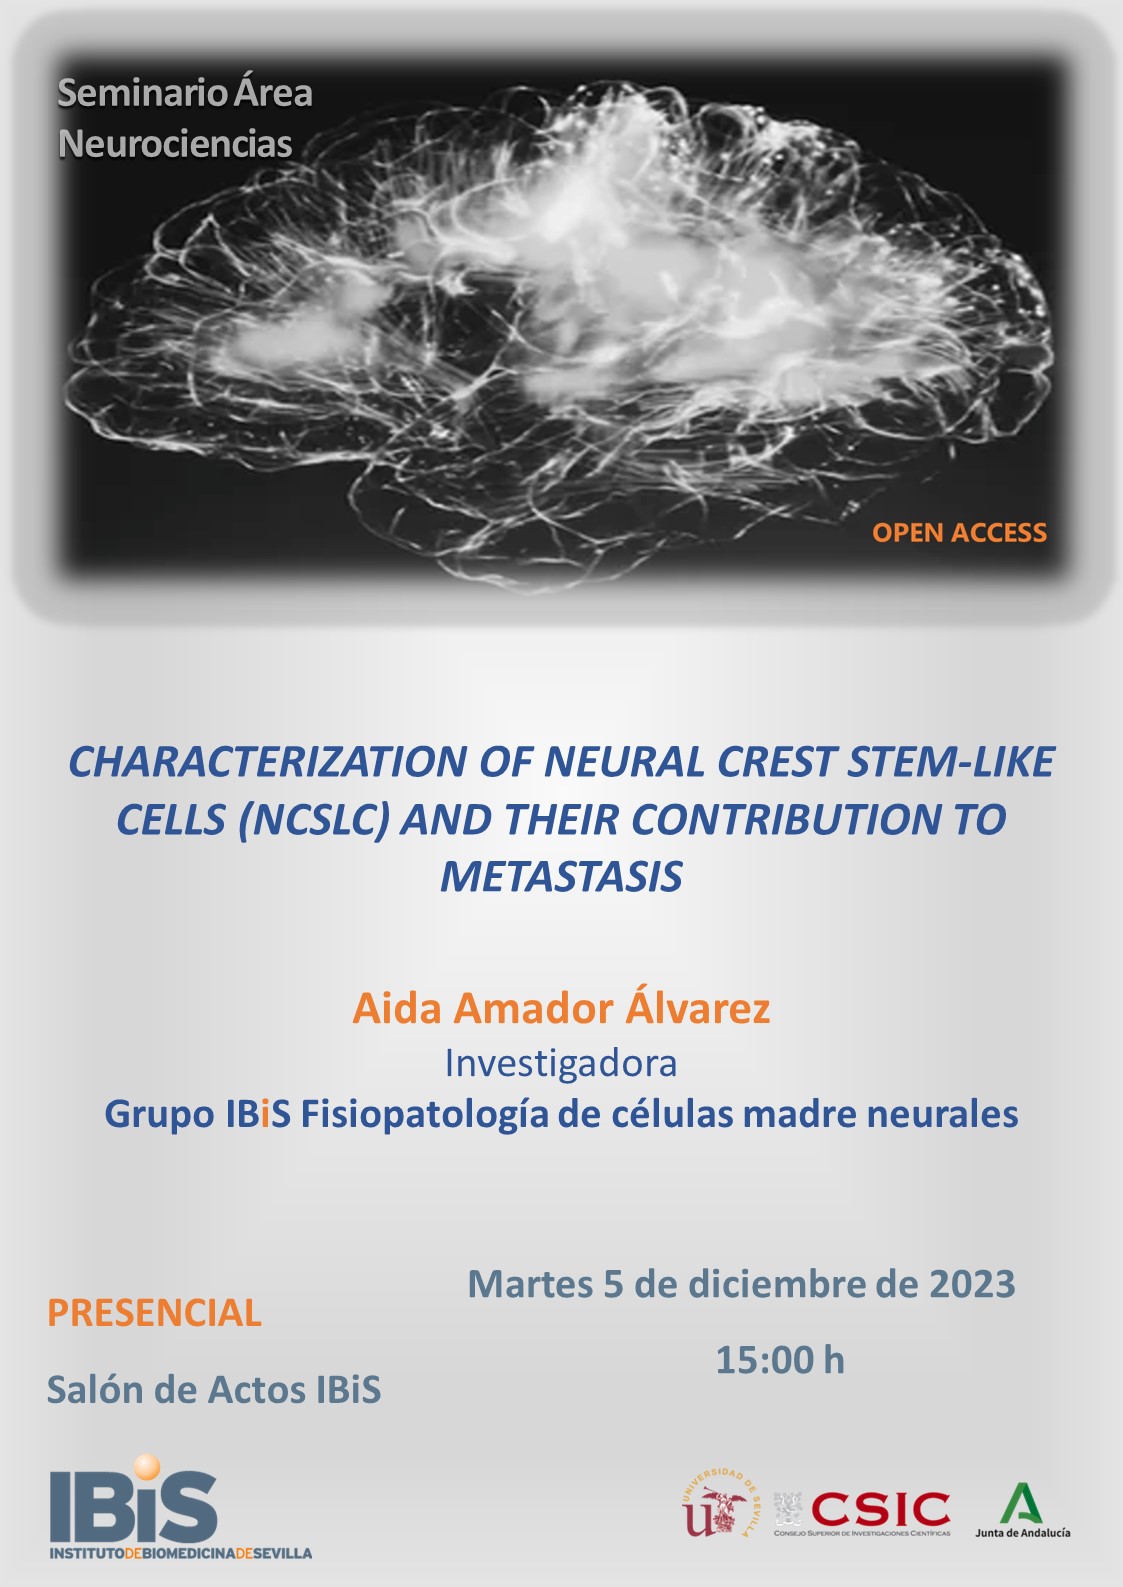 Poster: CHARACTERIZATION OF NEURAL CREST STEM-LIKE CELLS (NCSLC) AND THEIR CONTRIBUTION TO METASTASIS